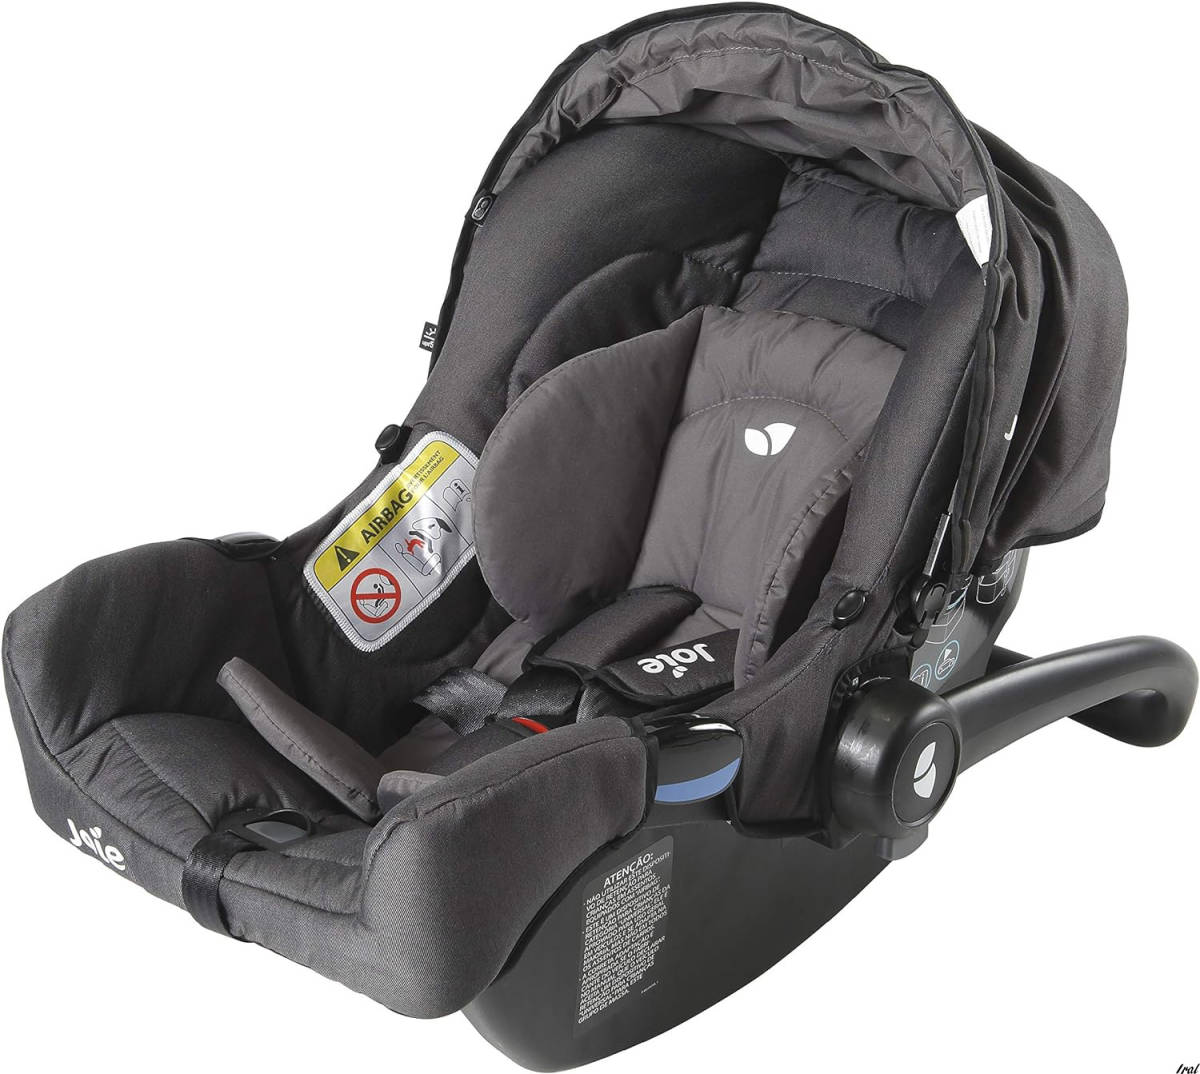 ISOFIX fixation rotary newborn baby from 11 -years old about ISOFIX 2 cocoa navy newborn baby correspondence child seat ②